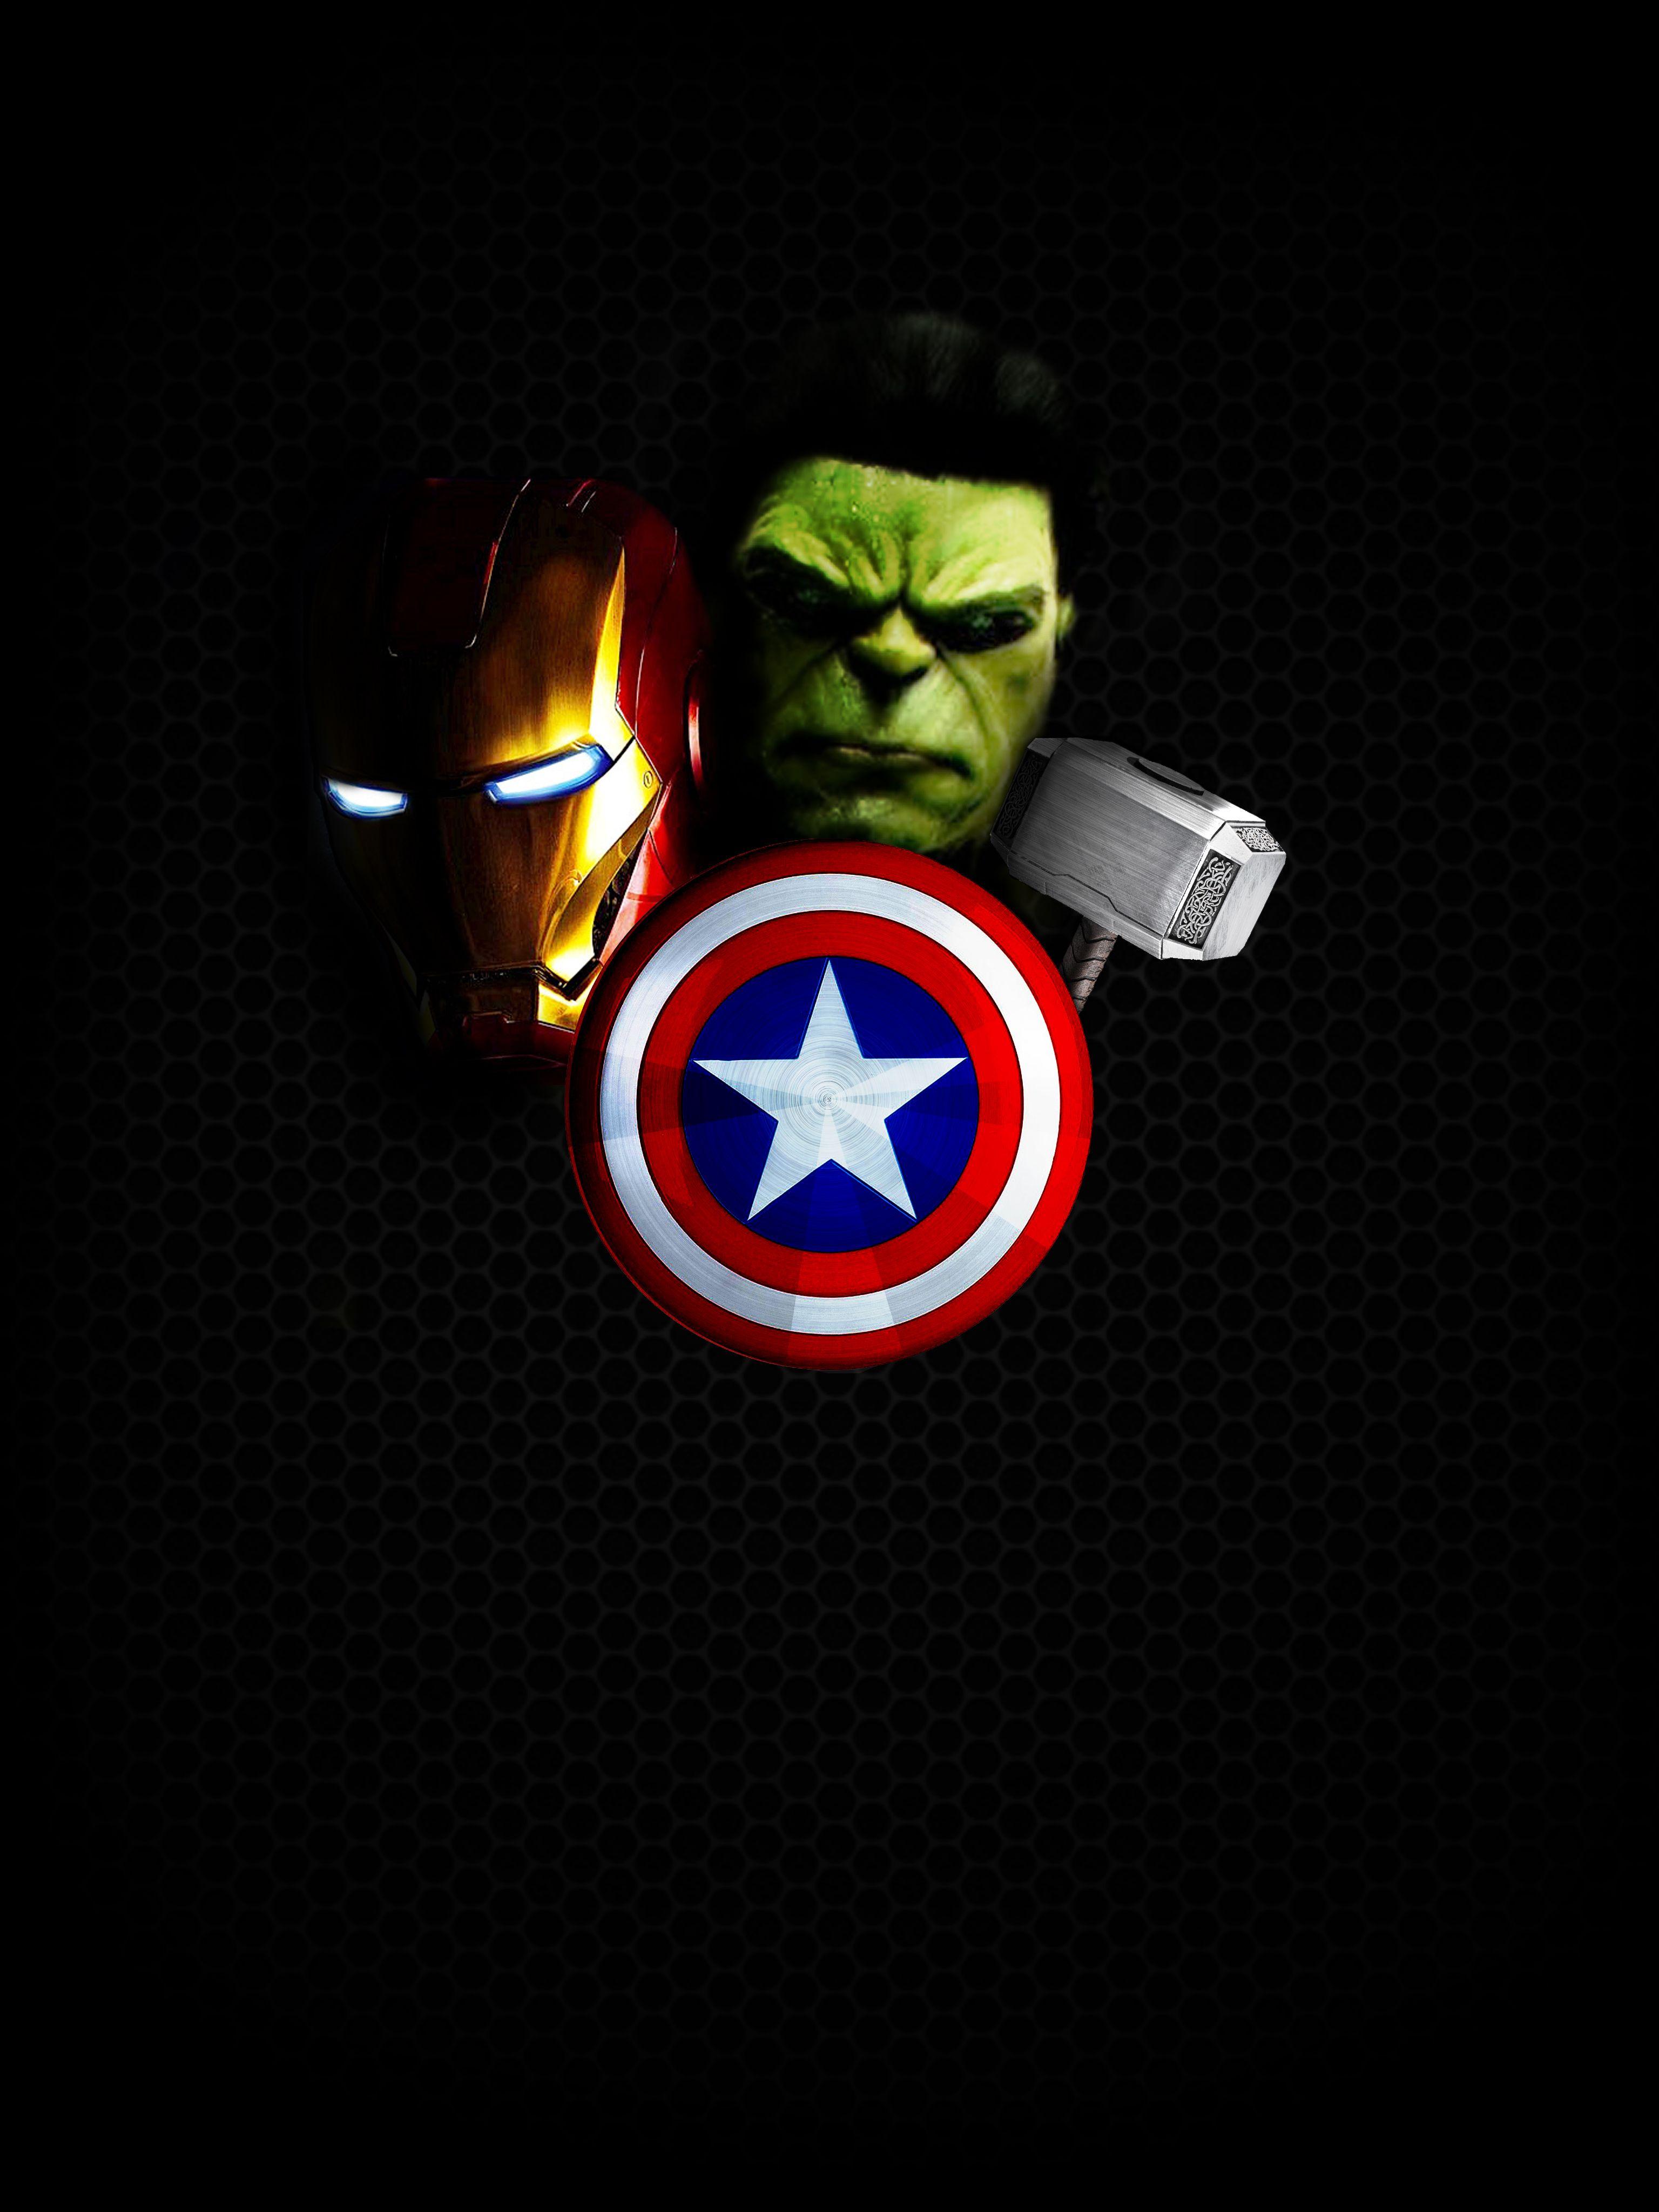 Hd Wallpapers 1080p For Android Phone Avengers